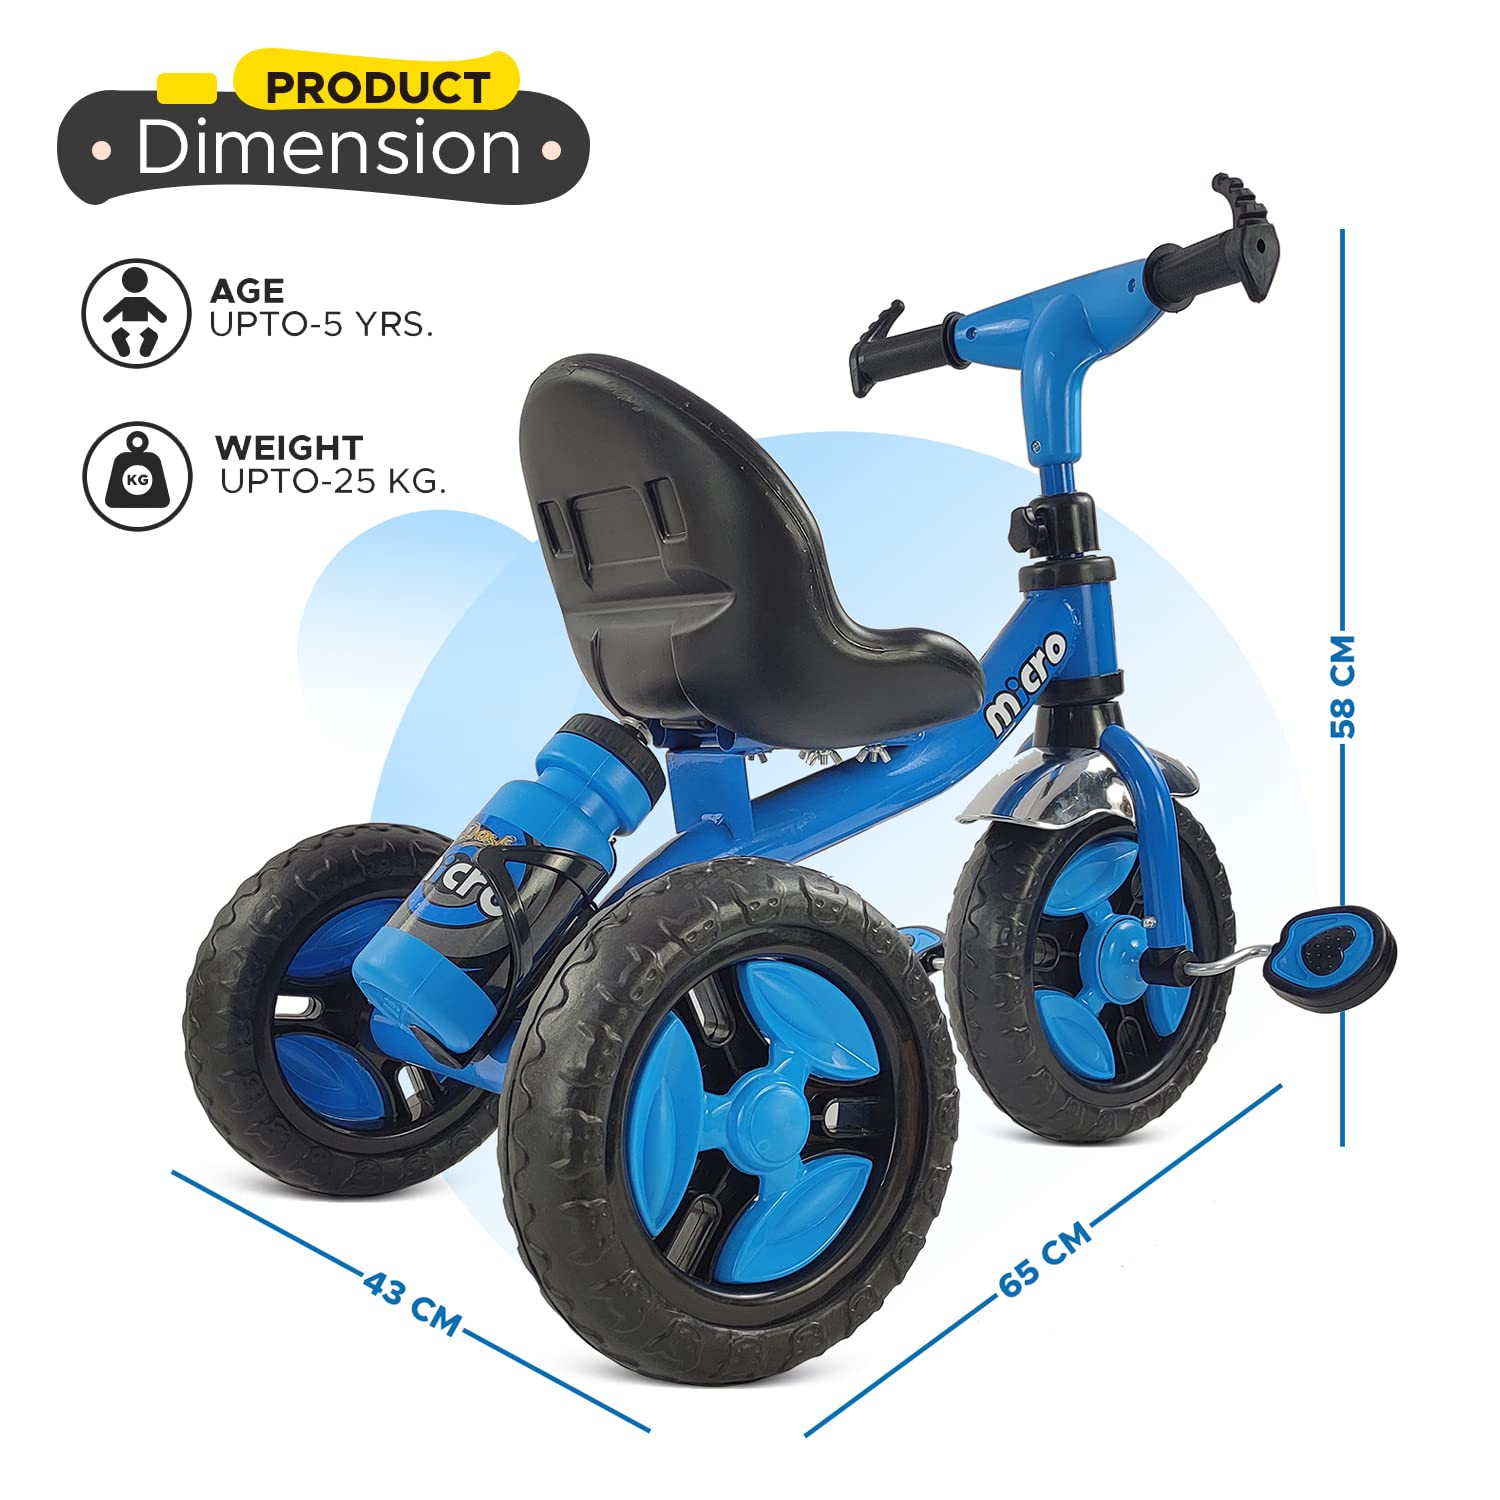 Dash Micro Cycle for Kids, Baby Cycle,Tricycle, Kids Cycle, Tricycle for Kids for 3 Years to 5 Years with Sipper